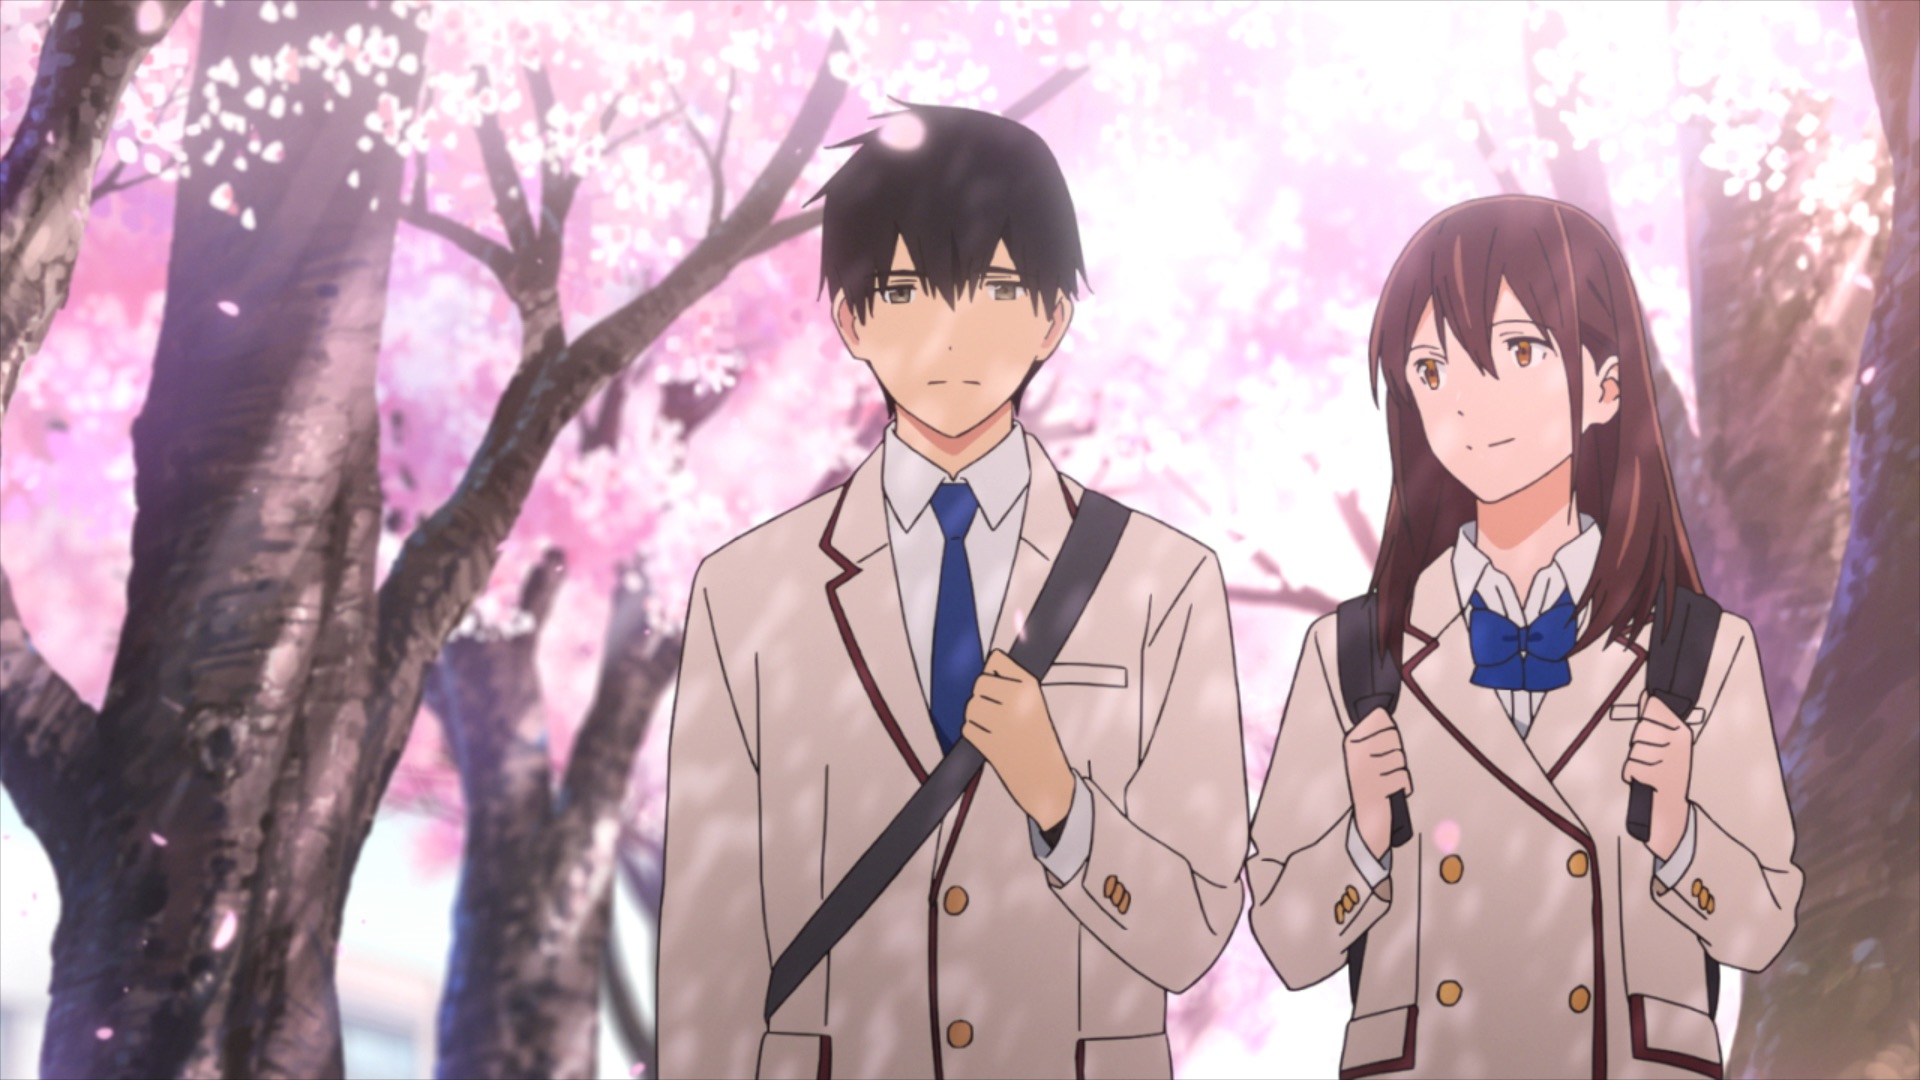 download subtitle i want to eat your pancreas